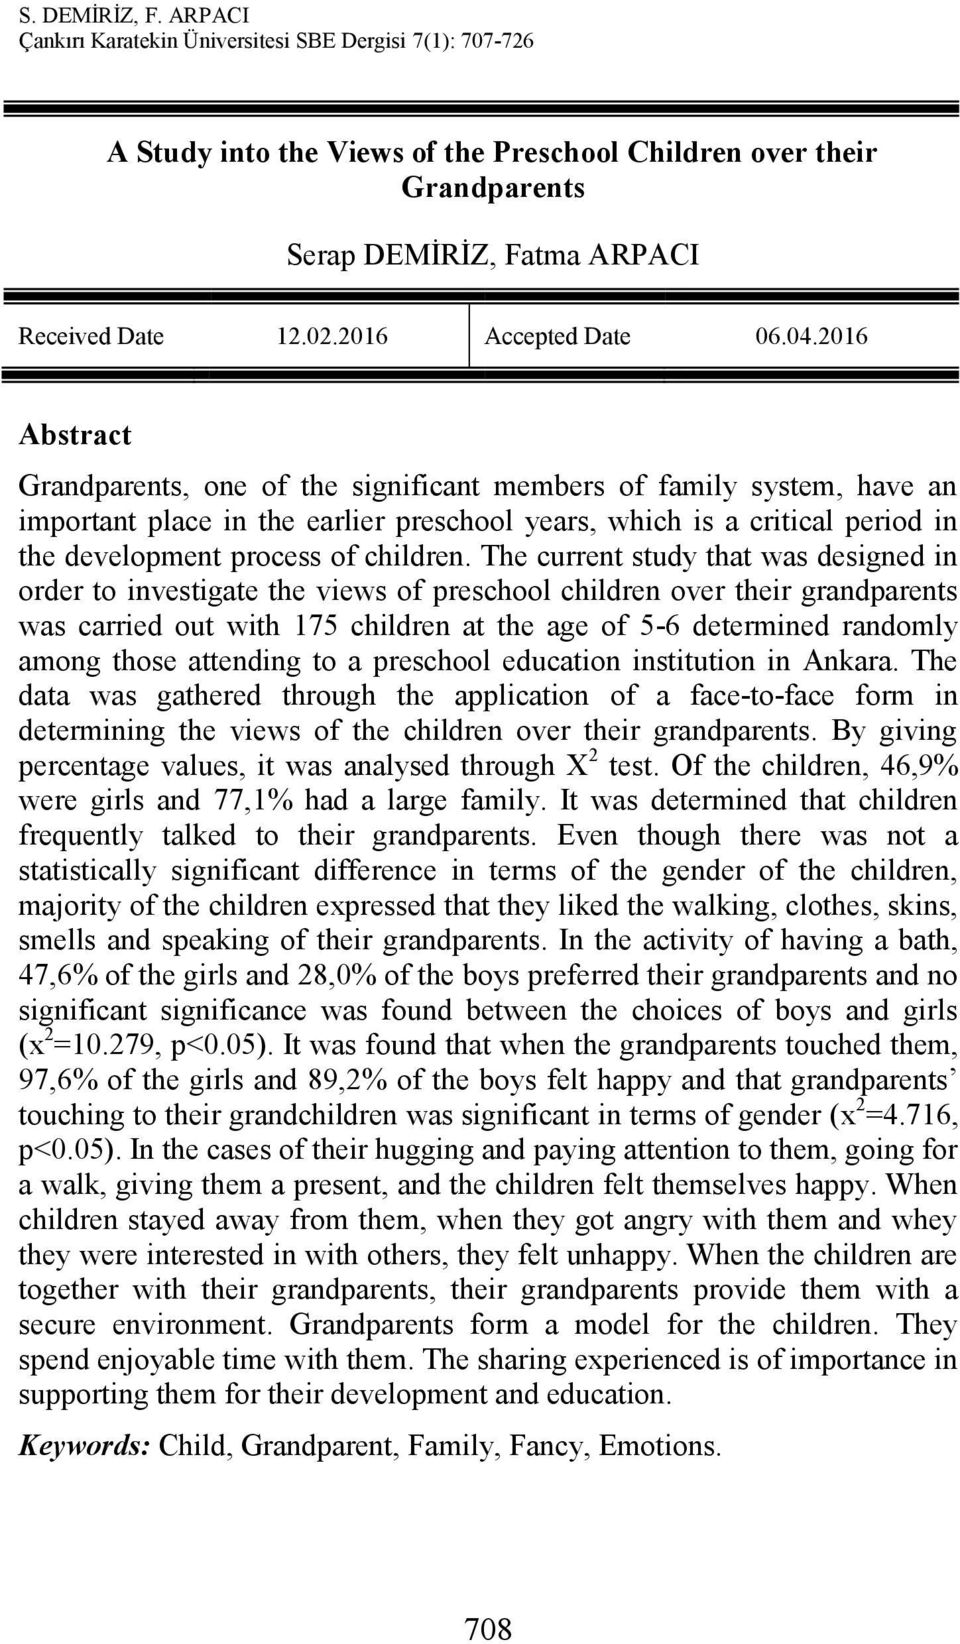 The current study that was designed in order to investigate the views of preschool children over their grandparents was carried out with 175 children at the age of 5-6 determined randomly among those